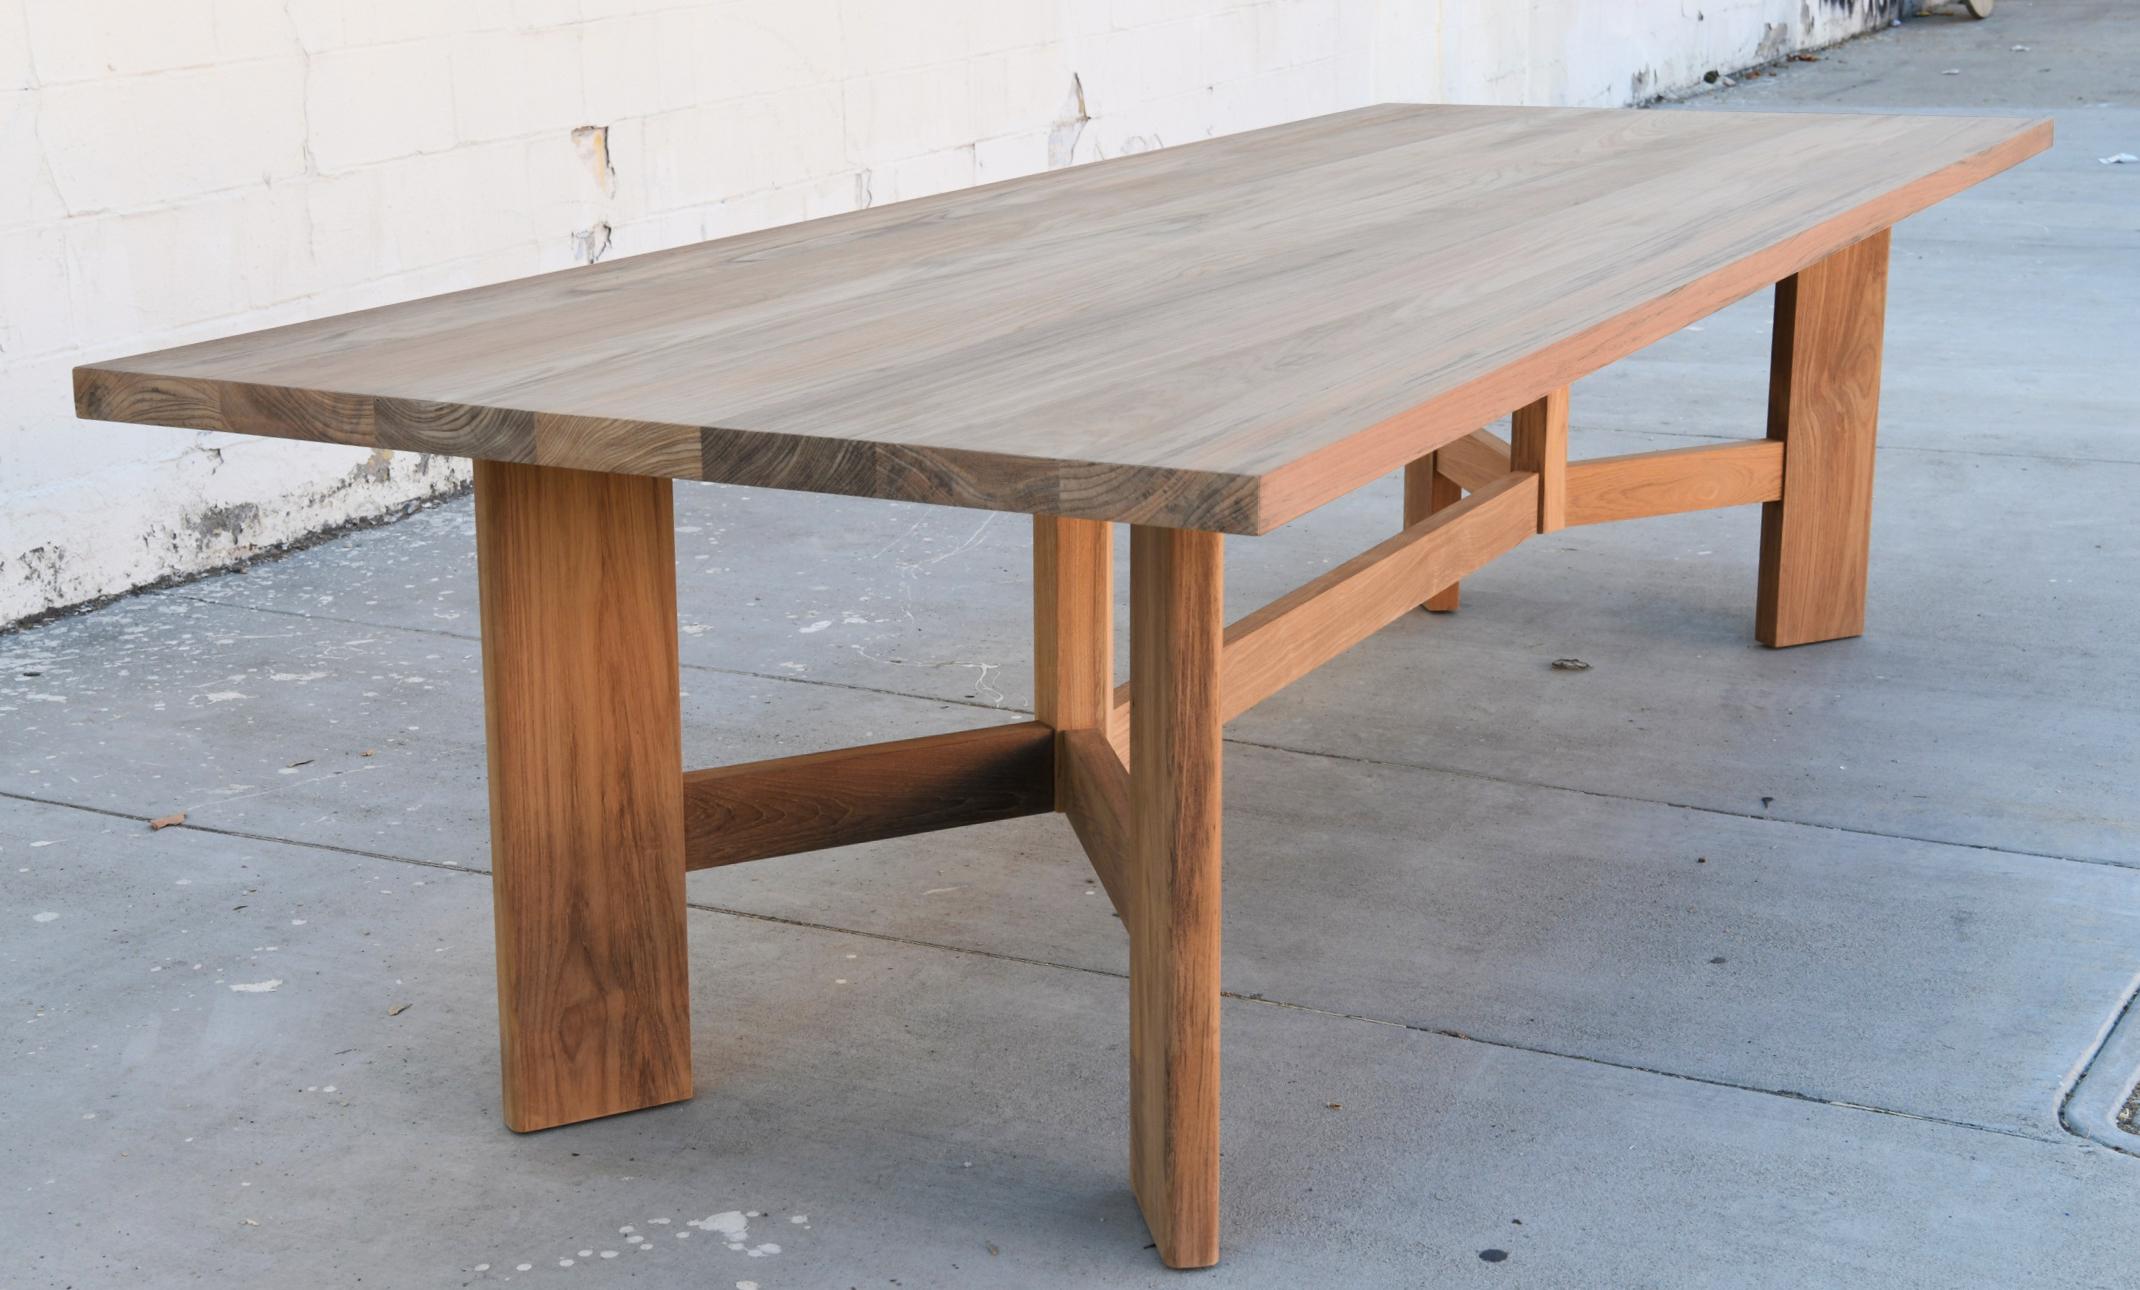 Designed to withstand any climate, this teak dining table can be used either indoors or outdoors. Seen here in 120